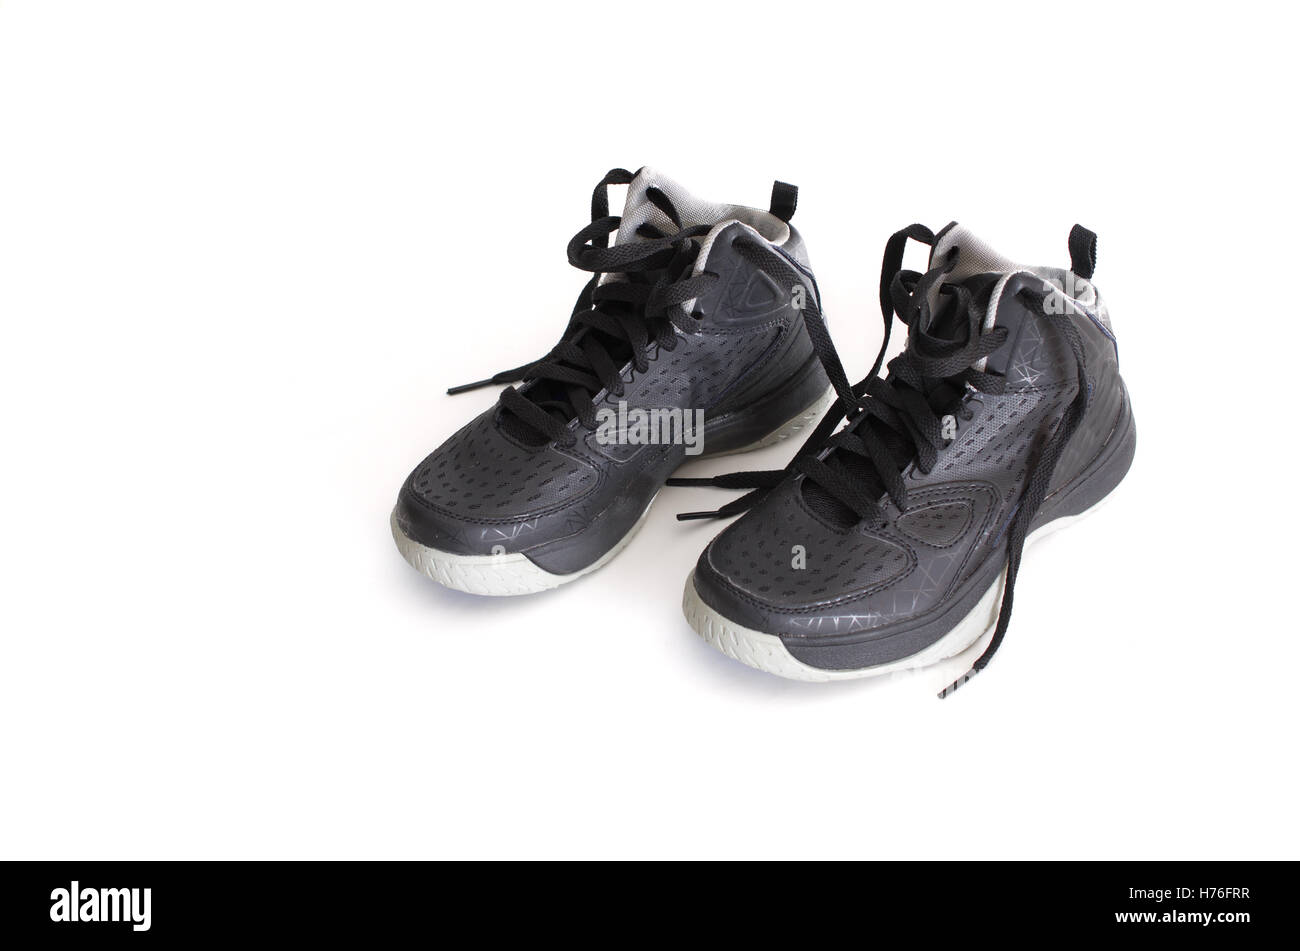 Children's modern high-top black leather and mesh basketball shoes,  sneakers isolated on white Stock Photo